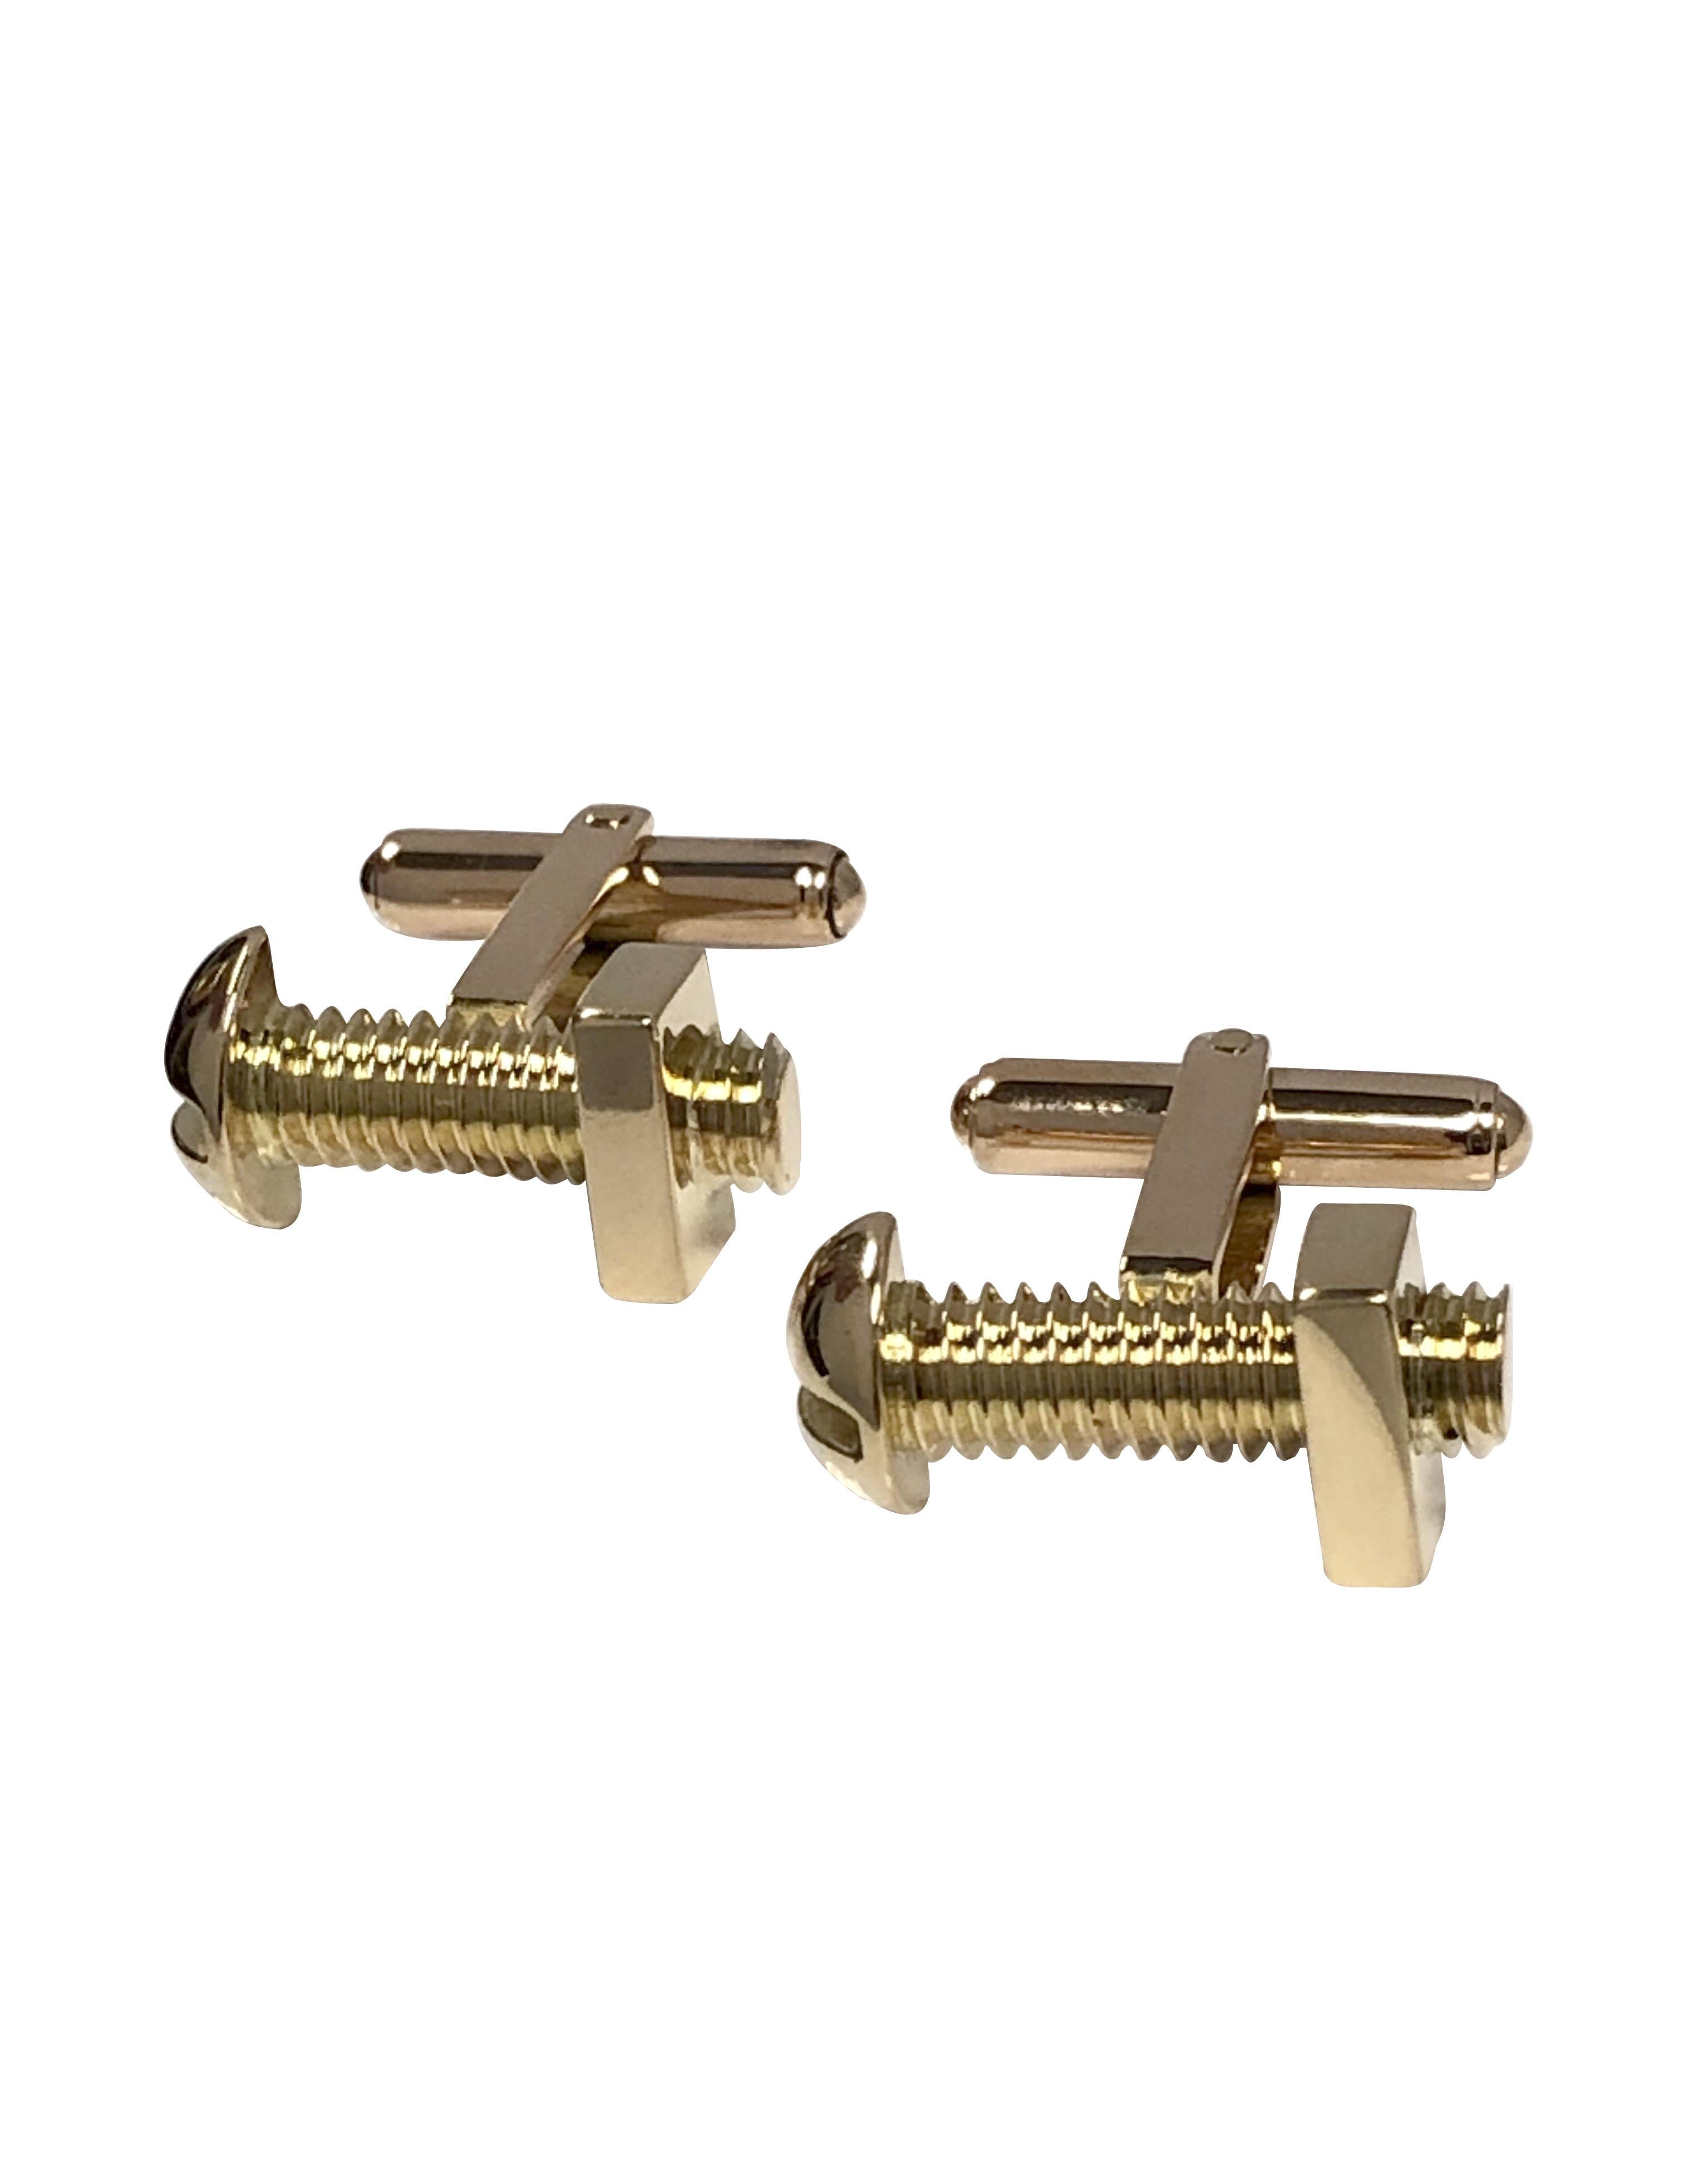 Circa 1980 14k Yellow Gold Nut and Bolt Design Cufflinks, measuring 7/8 inch in length and 3/8 inch wide, extremely well made with perfect detail, nice solid construction and weighing 15.6 Grams. Having toggle backs for easy on and off.